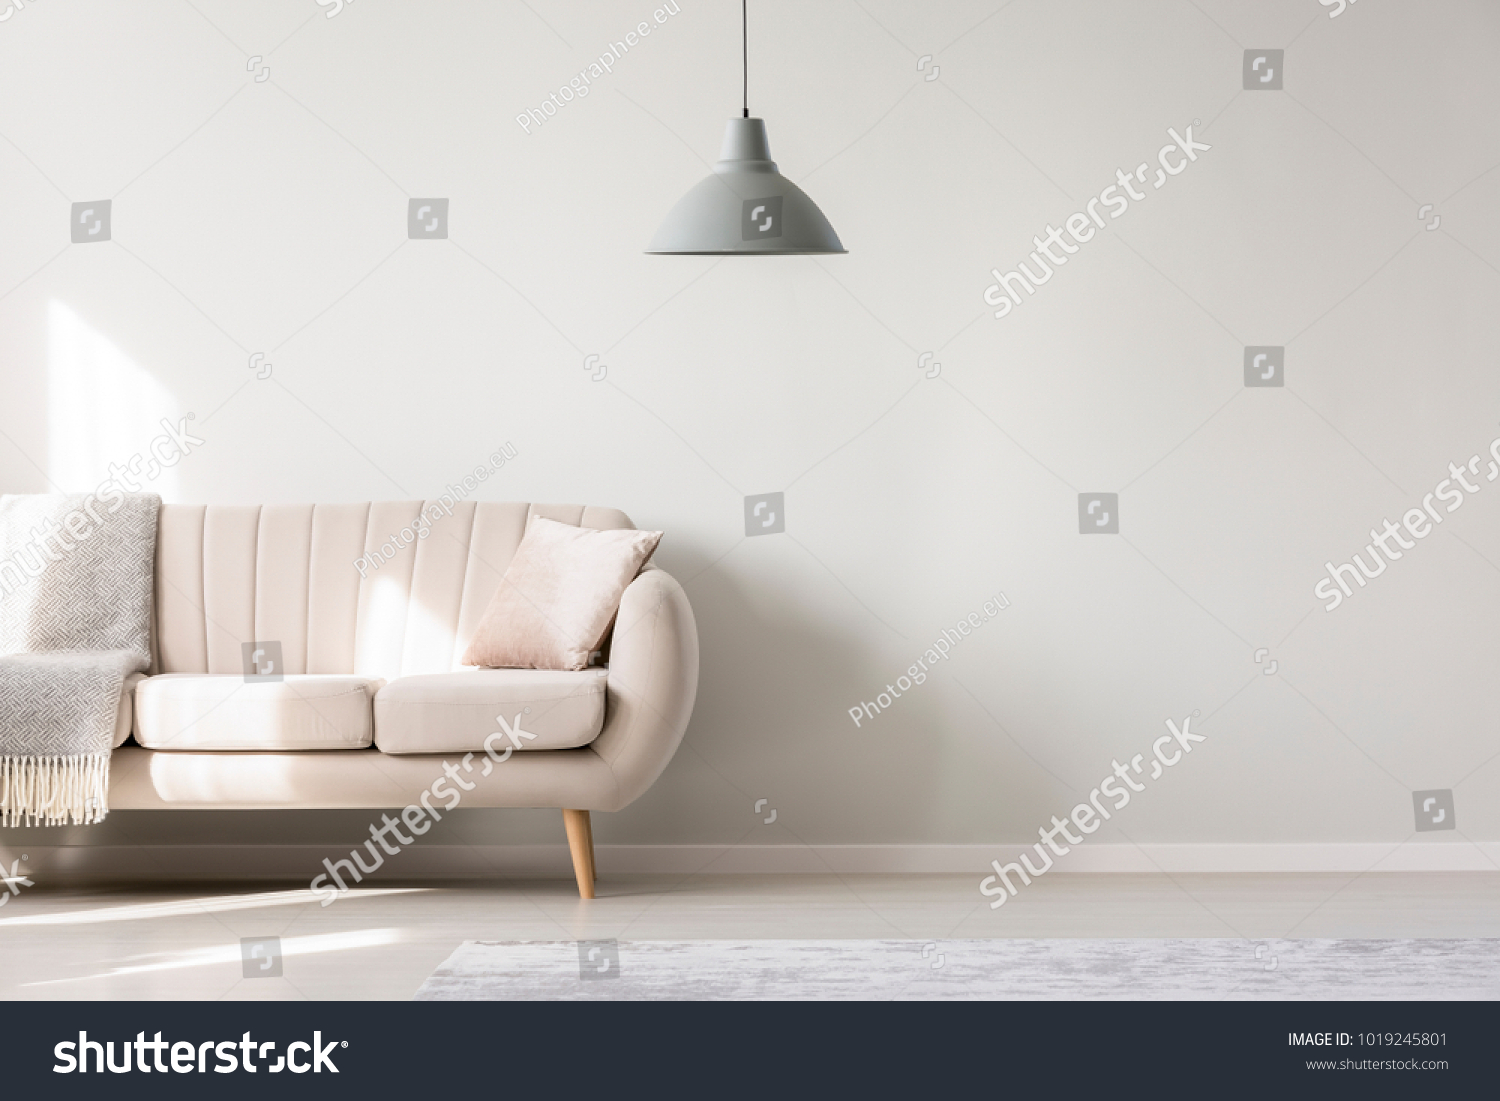 Beige sofa against white, empty wall with copy space in simple living room interior with lamp #1019245801